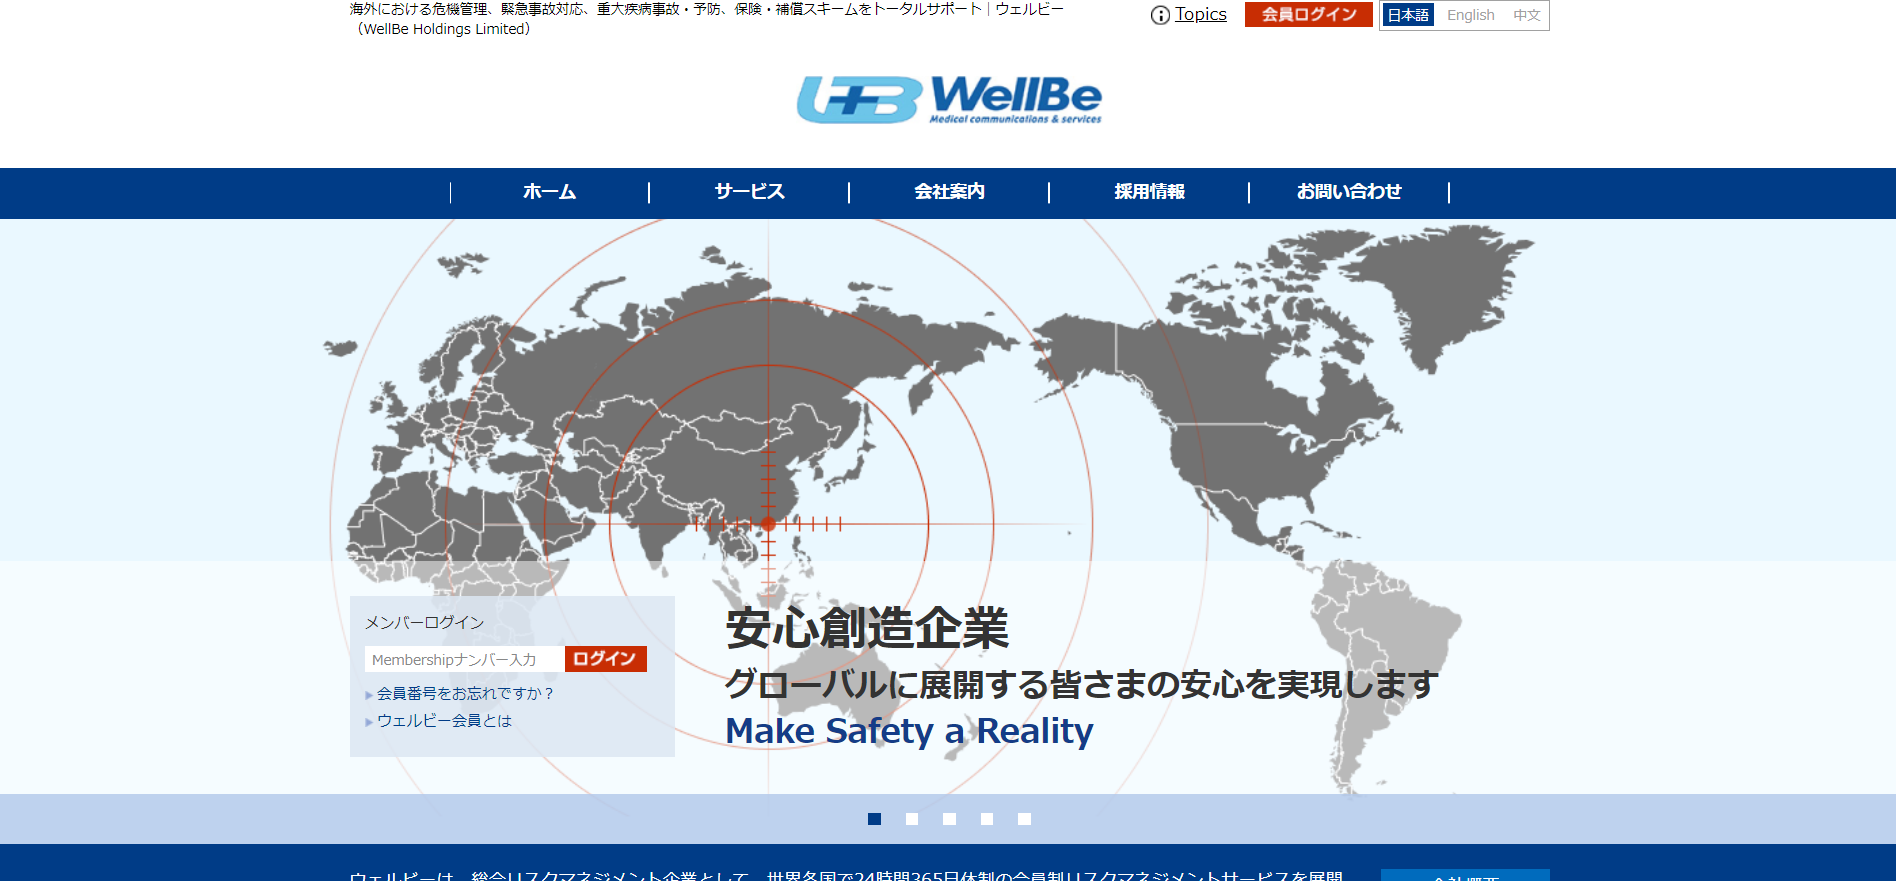 WellBe Holdings Limitedの評判・口コミは？